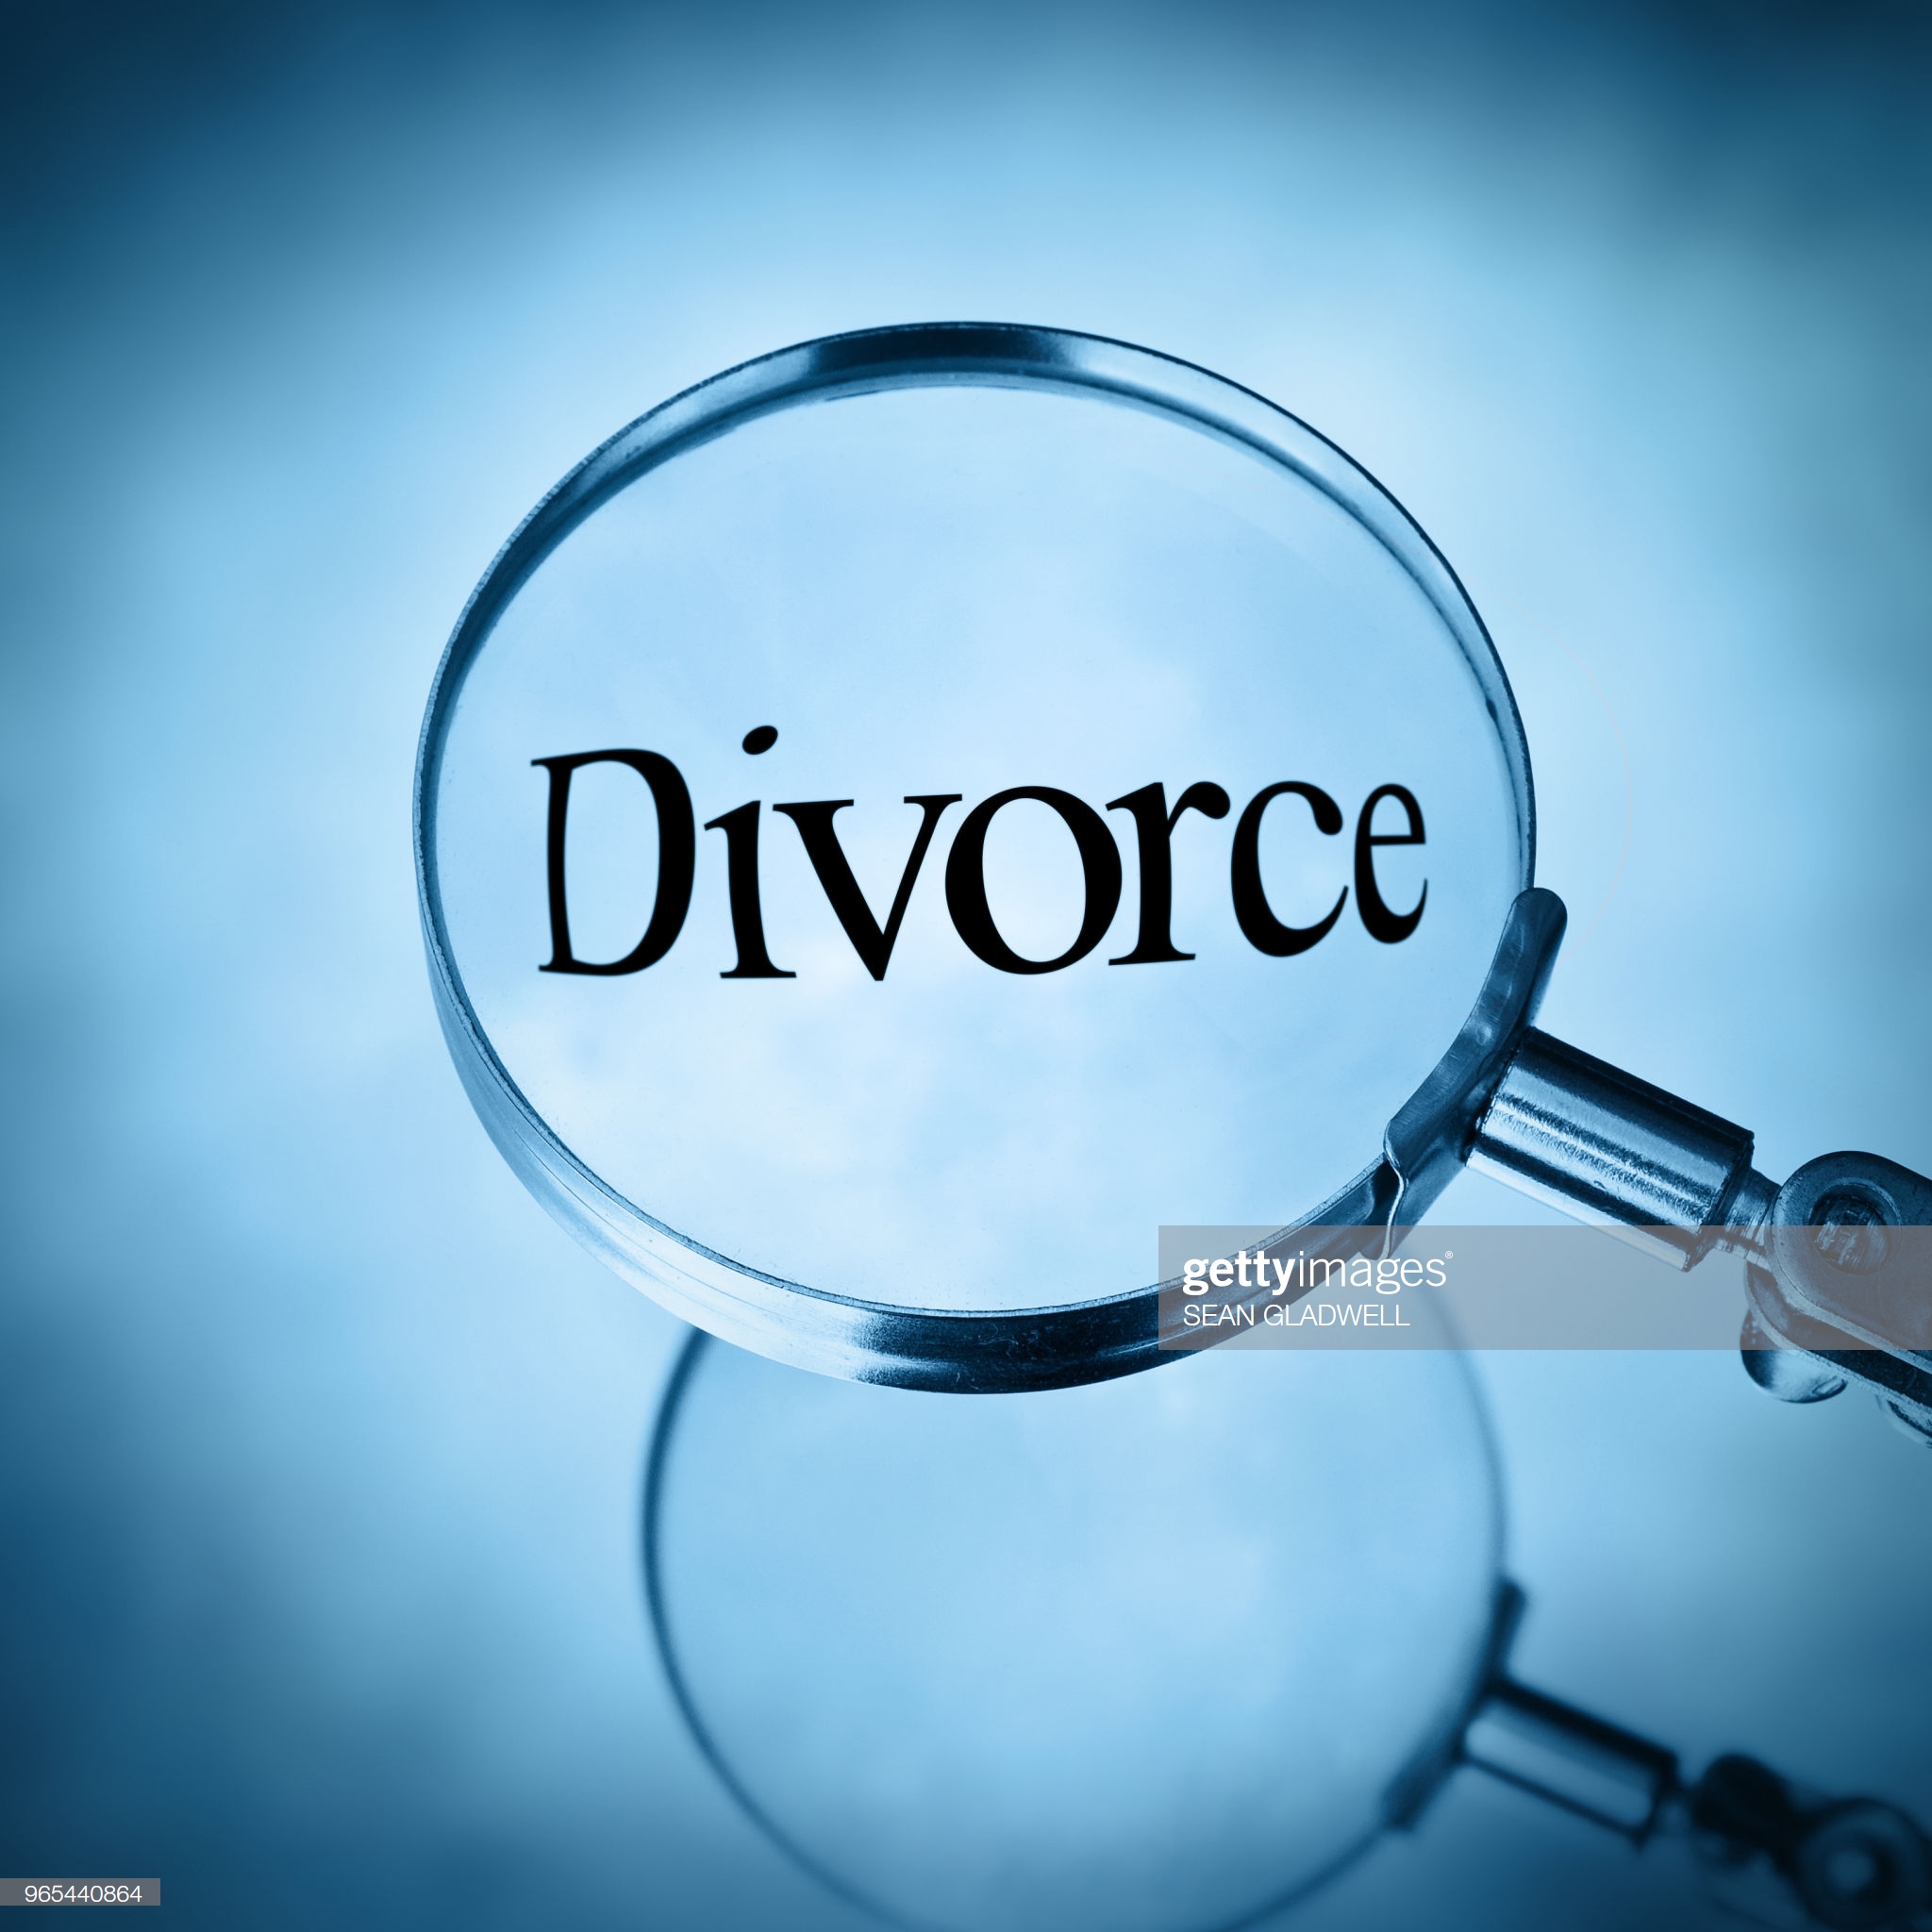 May the divorce claim raised by an at-fault spouse be granted in Korea?